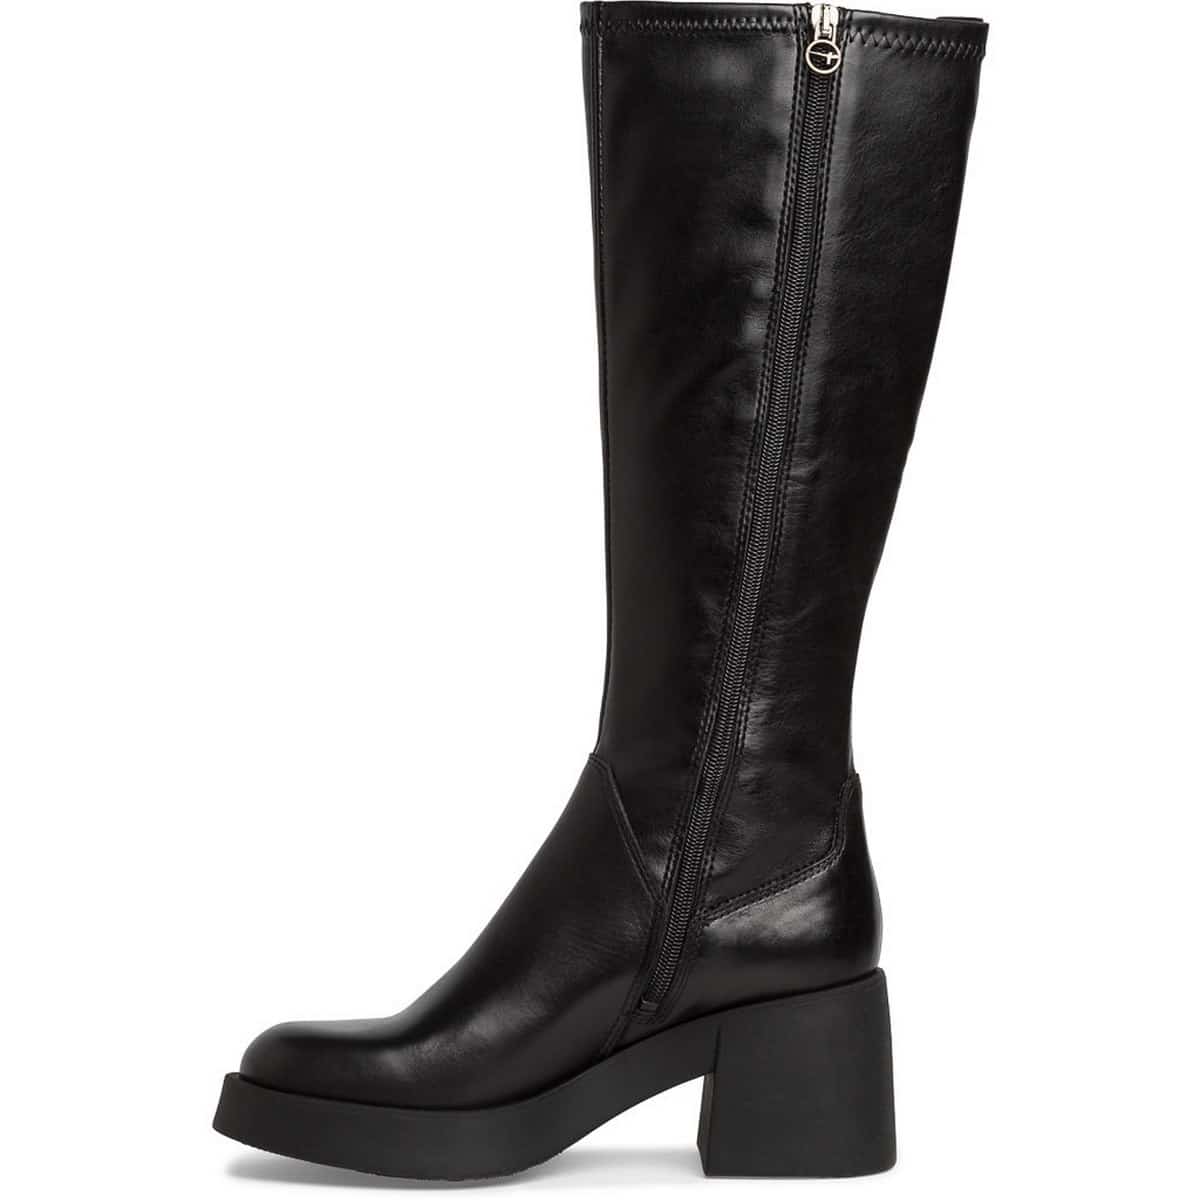 LEATHER SHOCK BOOTS WITH CHUNKY HEEL 1-25616-41 001 TAMARIS BLACK